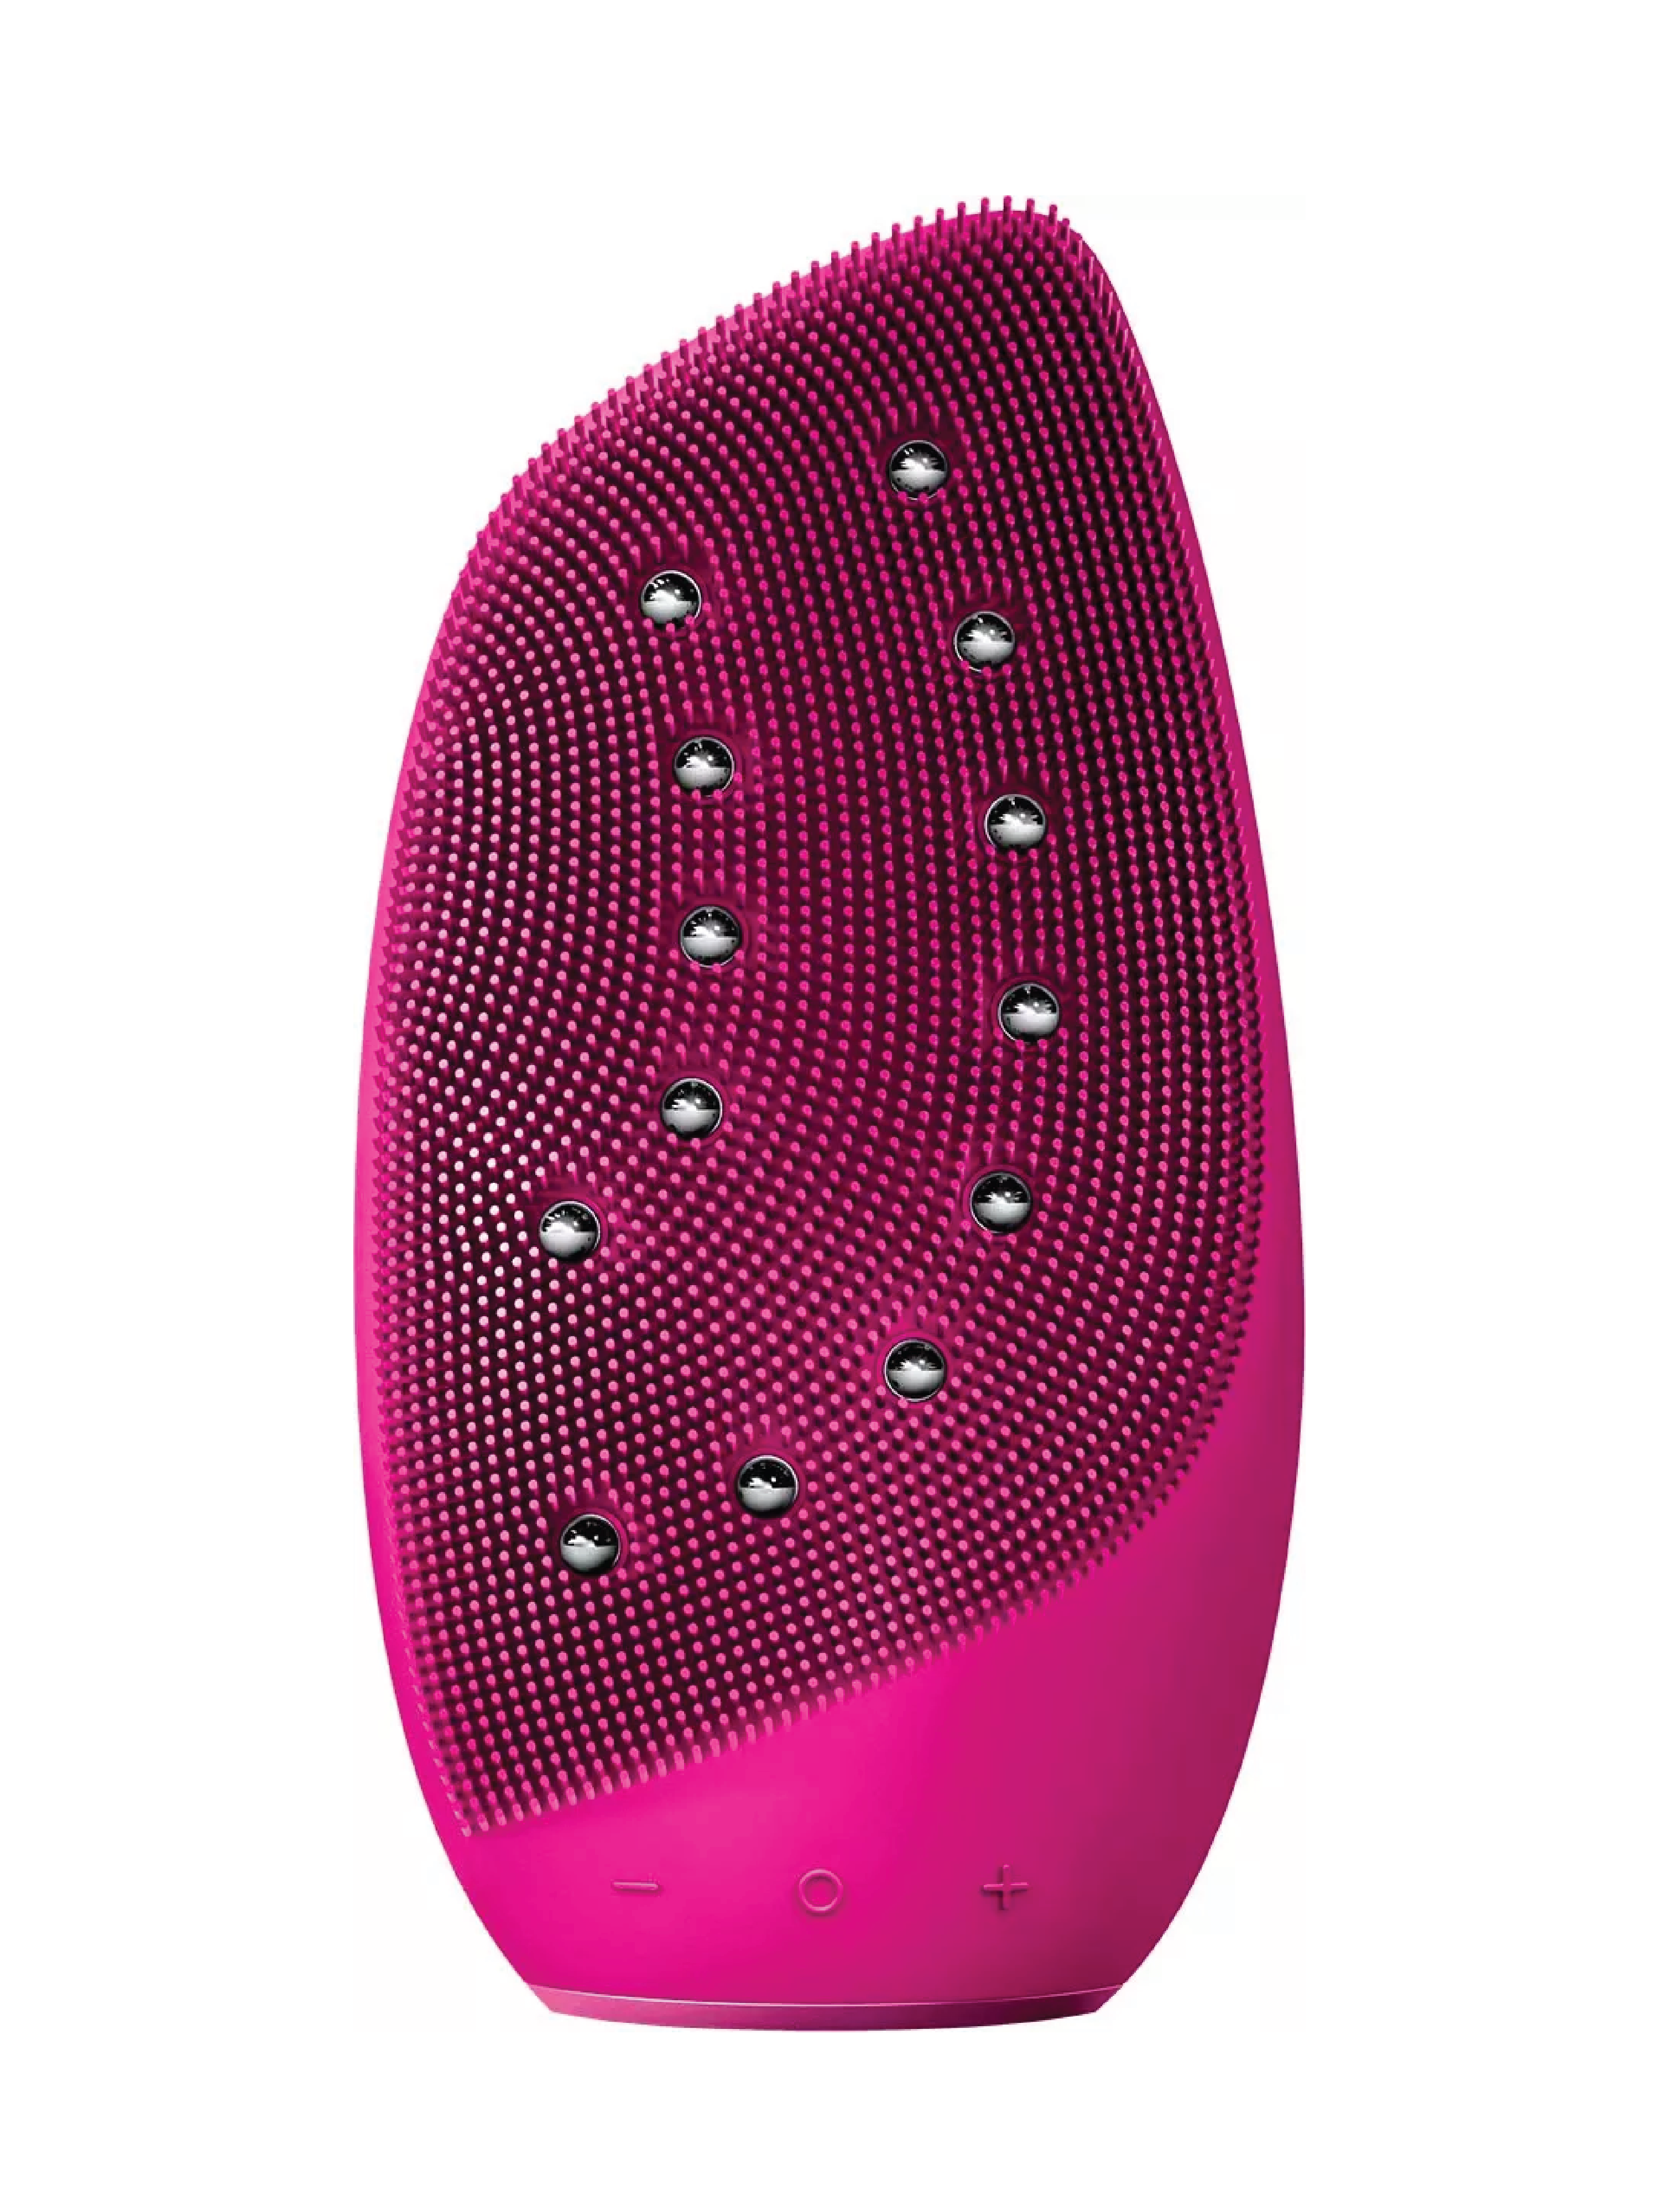 Geske Sonic Thermo Facial Brush & Face-Lifter 8 in 1, Magenta, 1 stk.